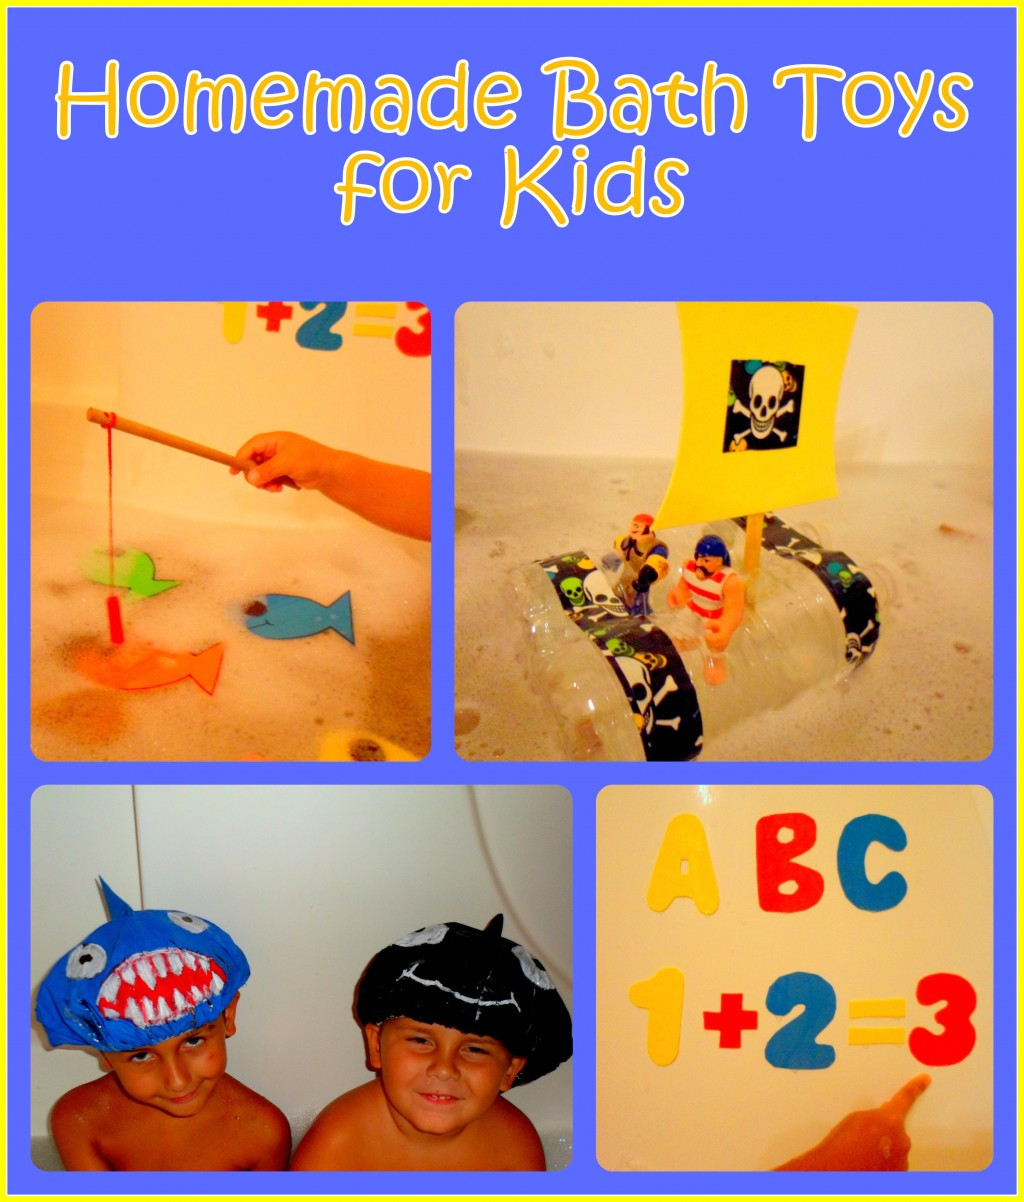 DIY Toys For Toddlers
 How to Make Homemade Bath Toys for Kids